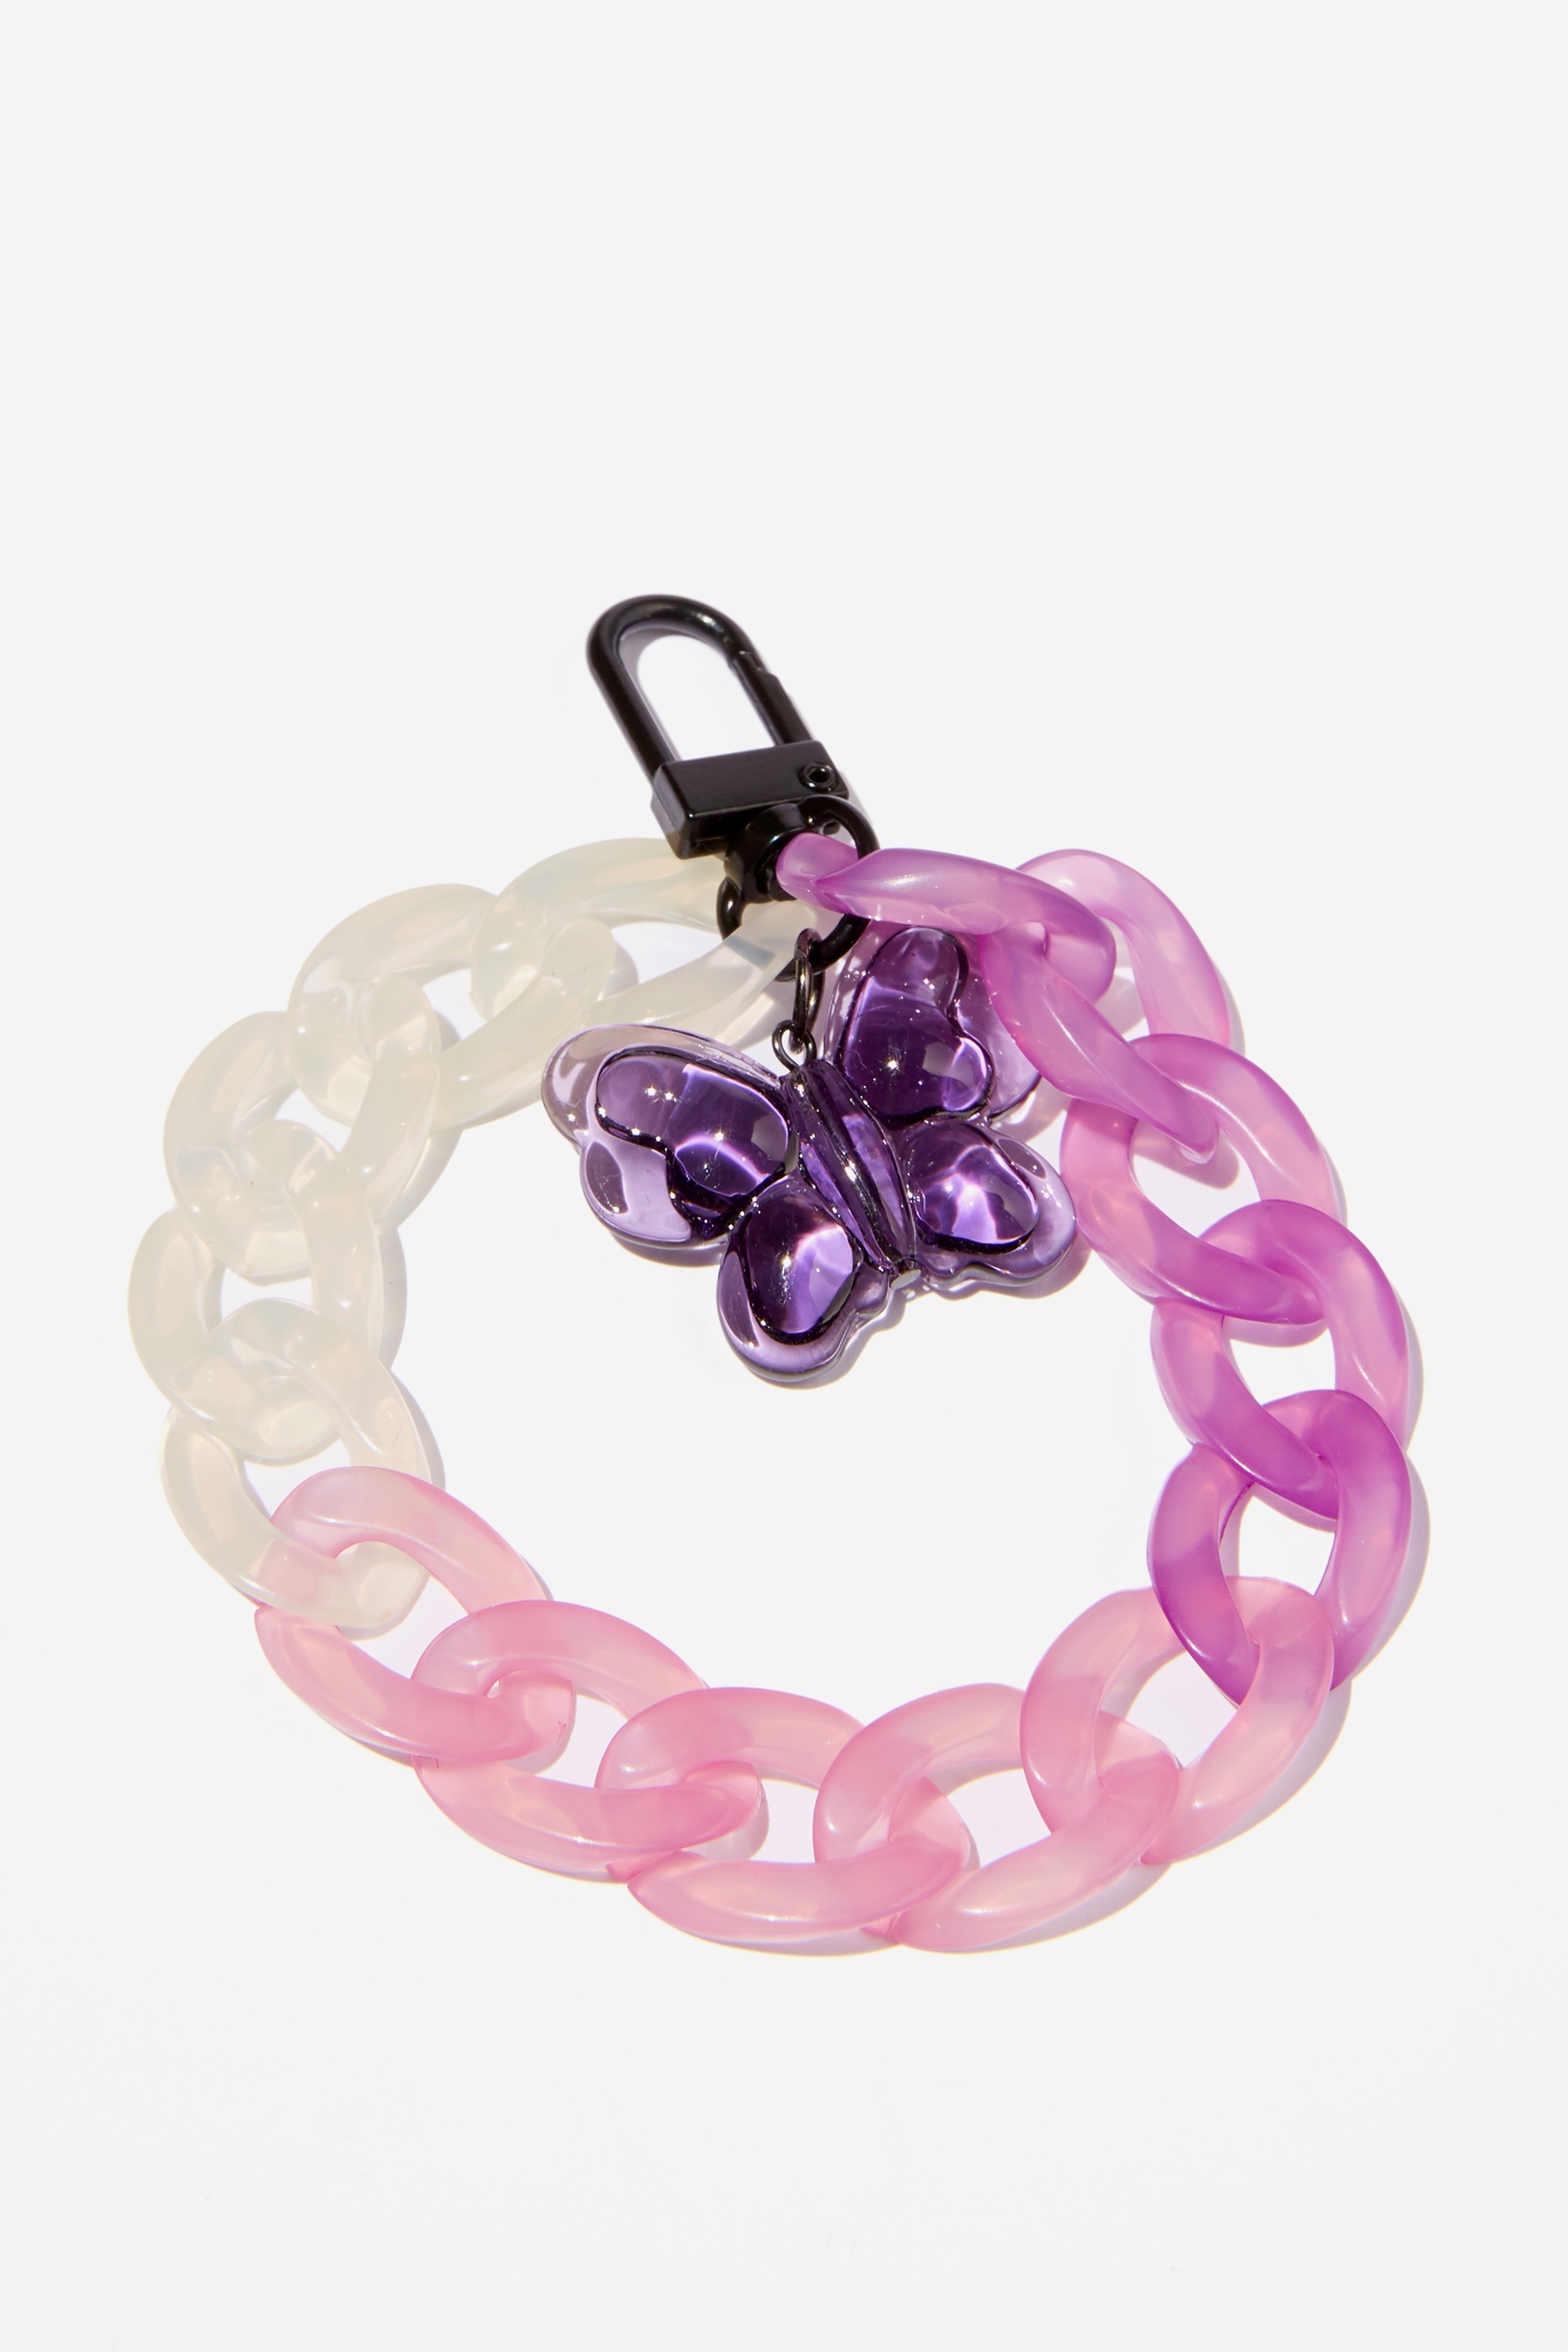 Typo - Trinket Bag Charm - Ombre purple chain & butterfly